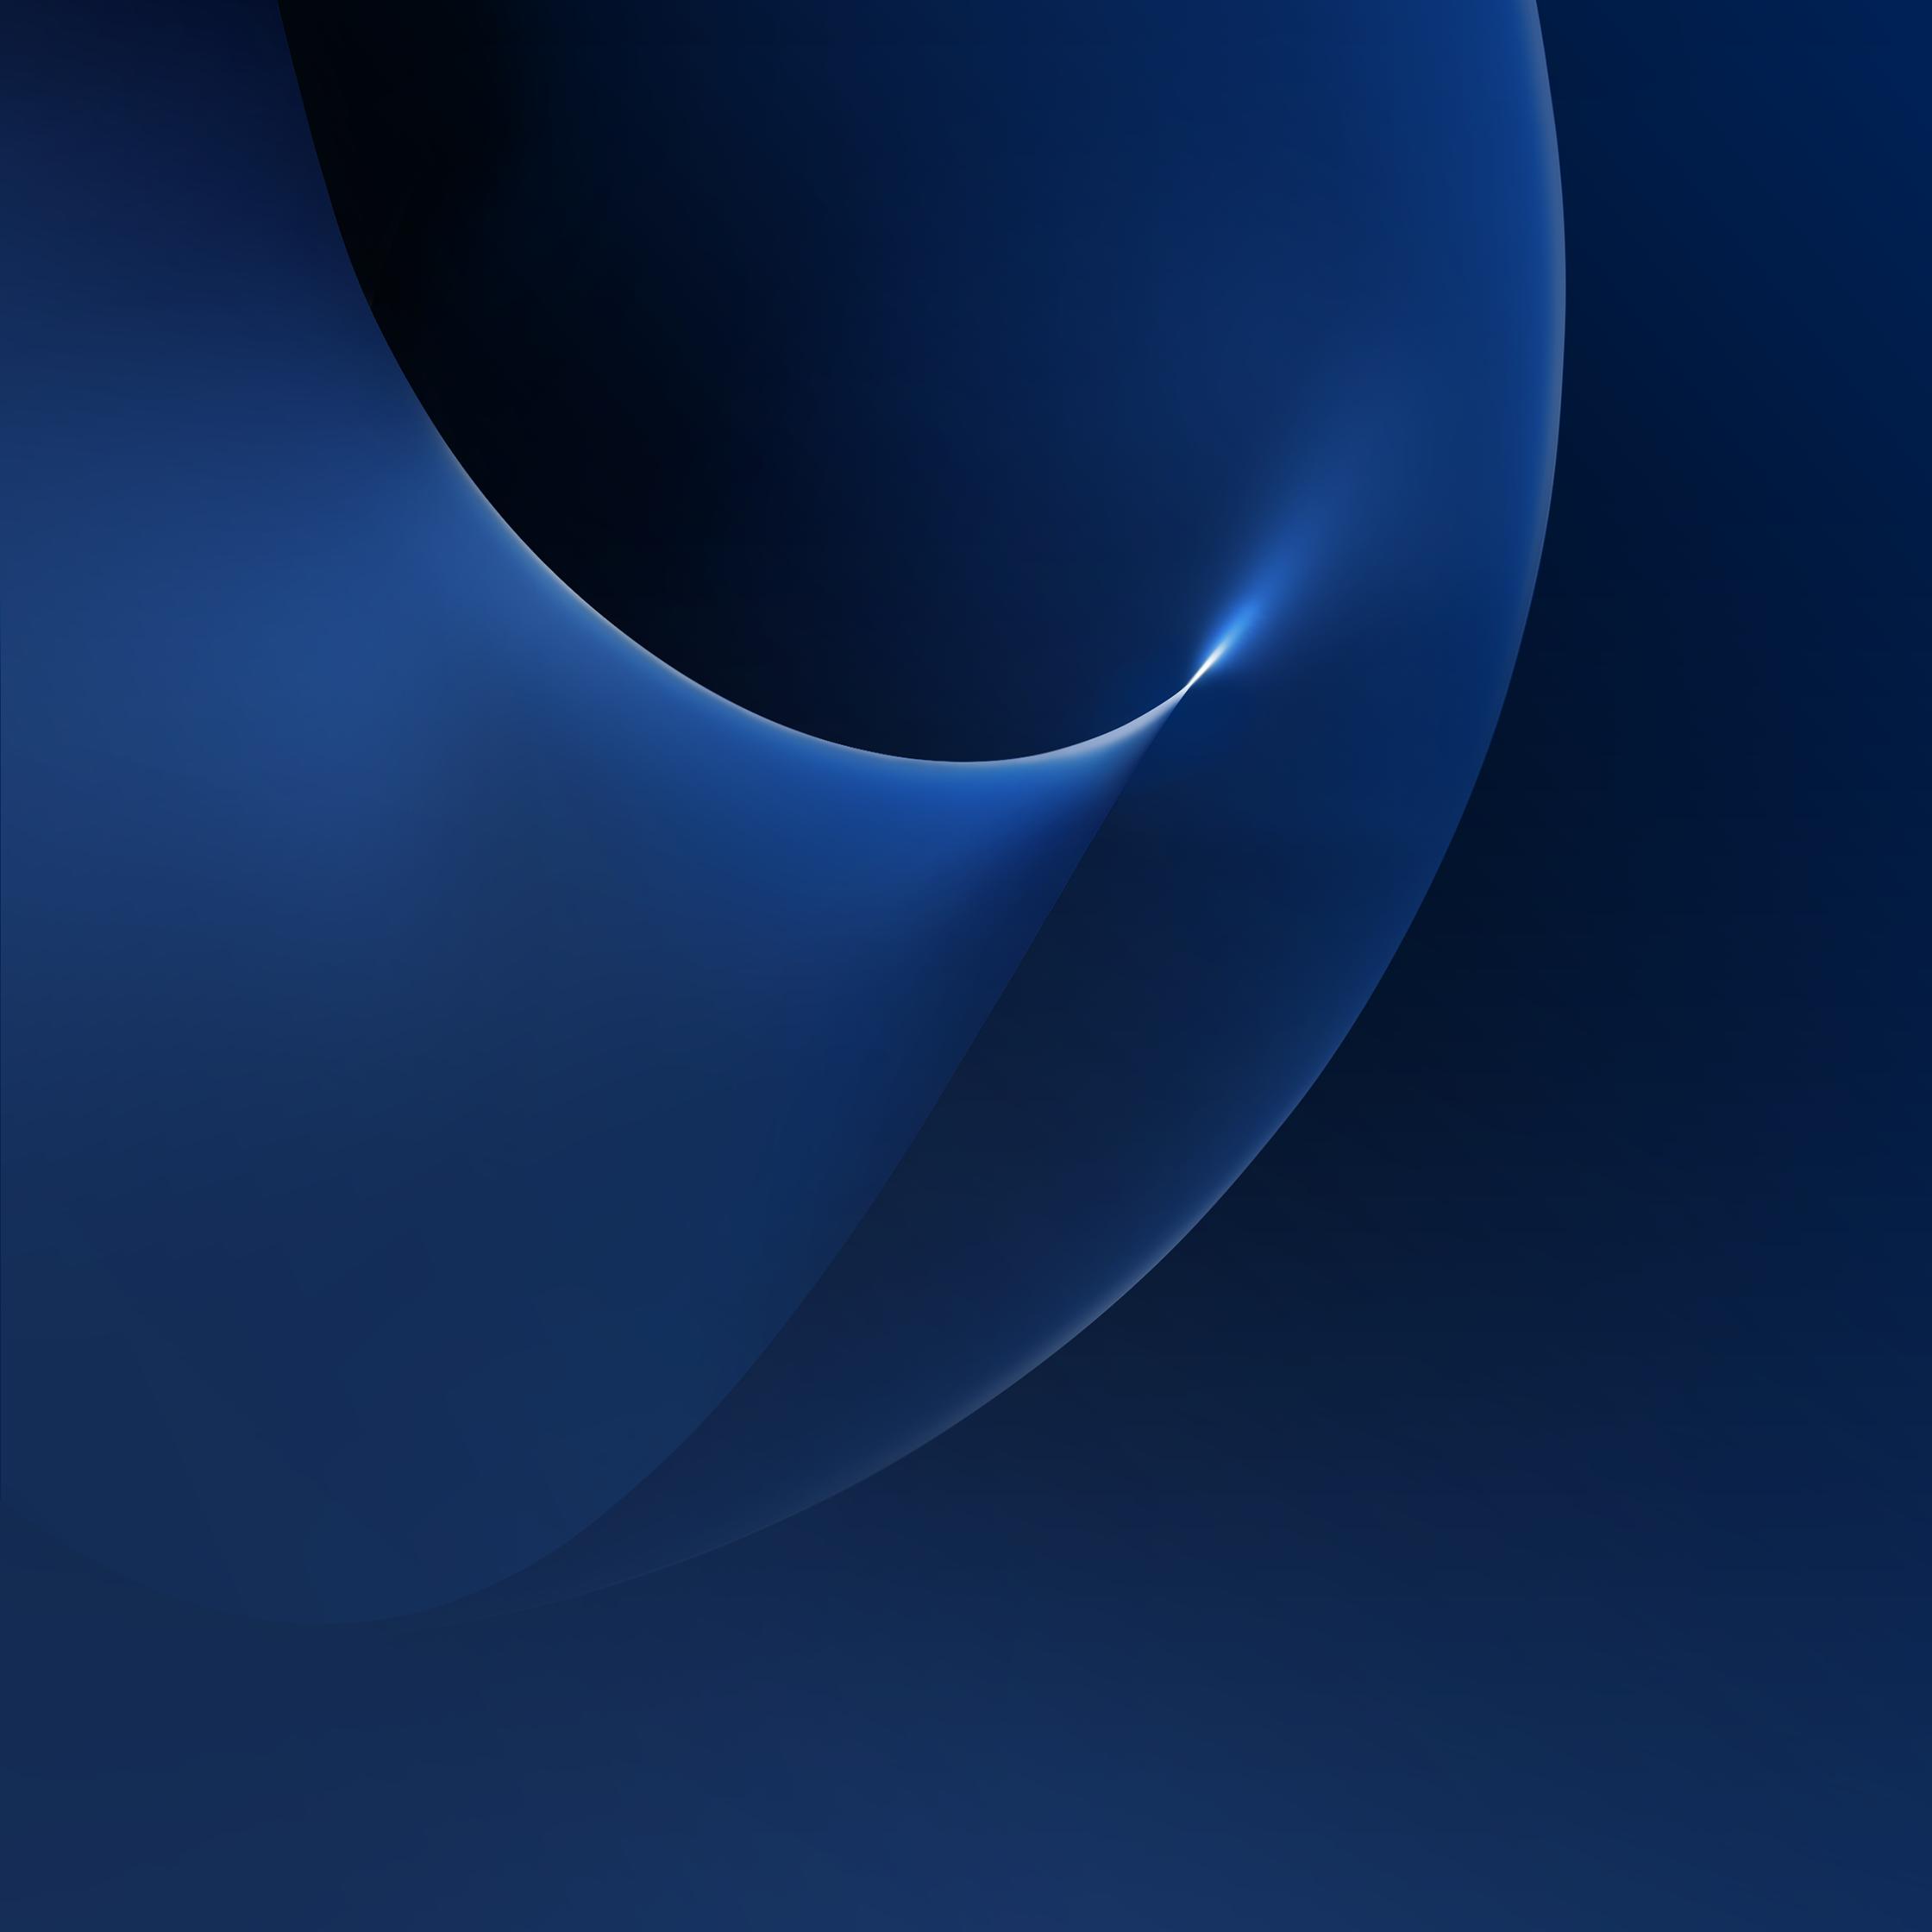 S7 Edge Wallpaper For Android Apk